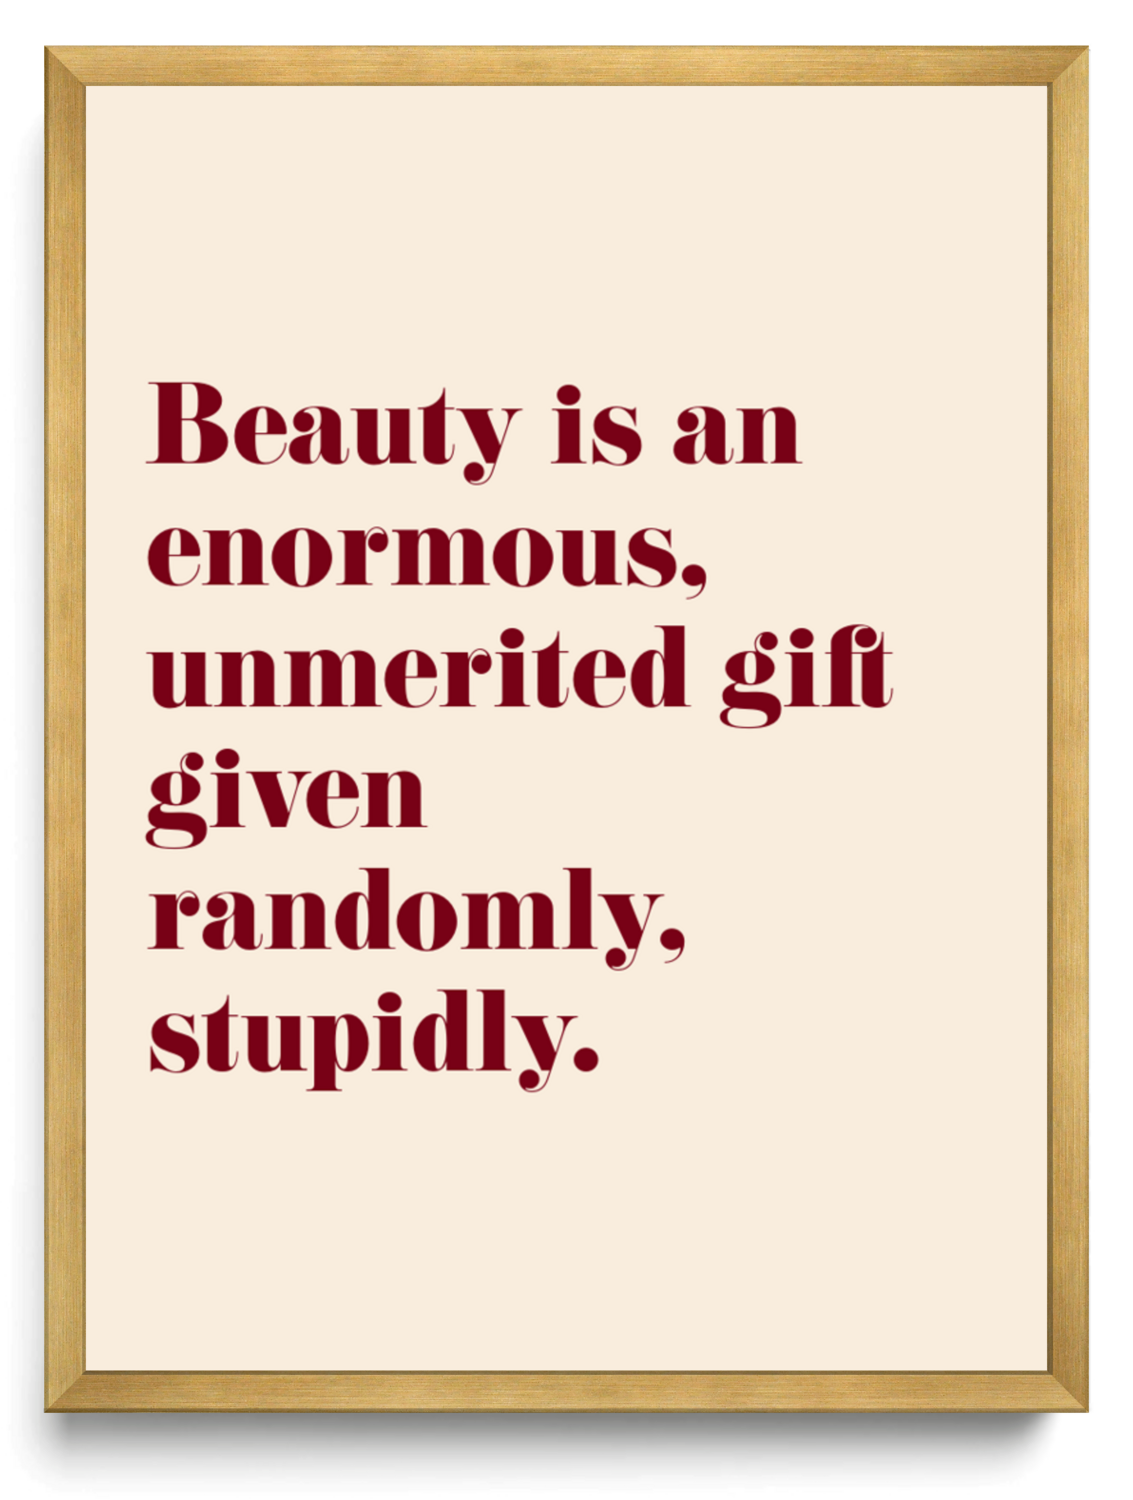 Beauty is an enormous unmerited gift given randomly stupidly framed typographic print